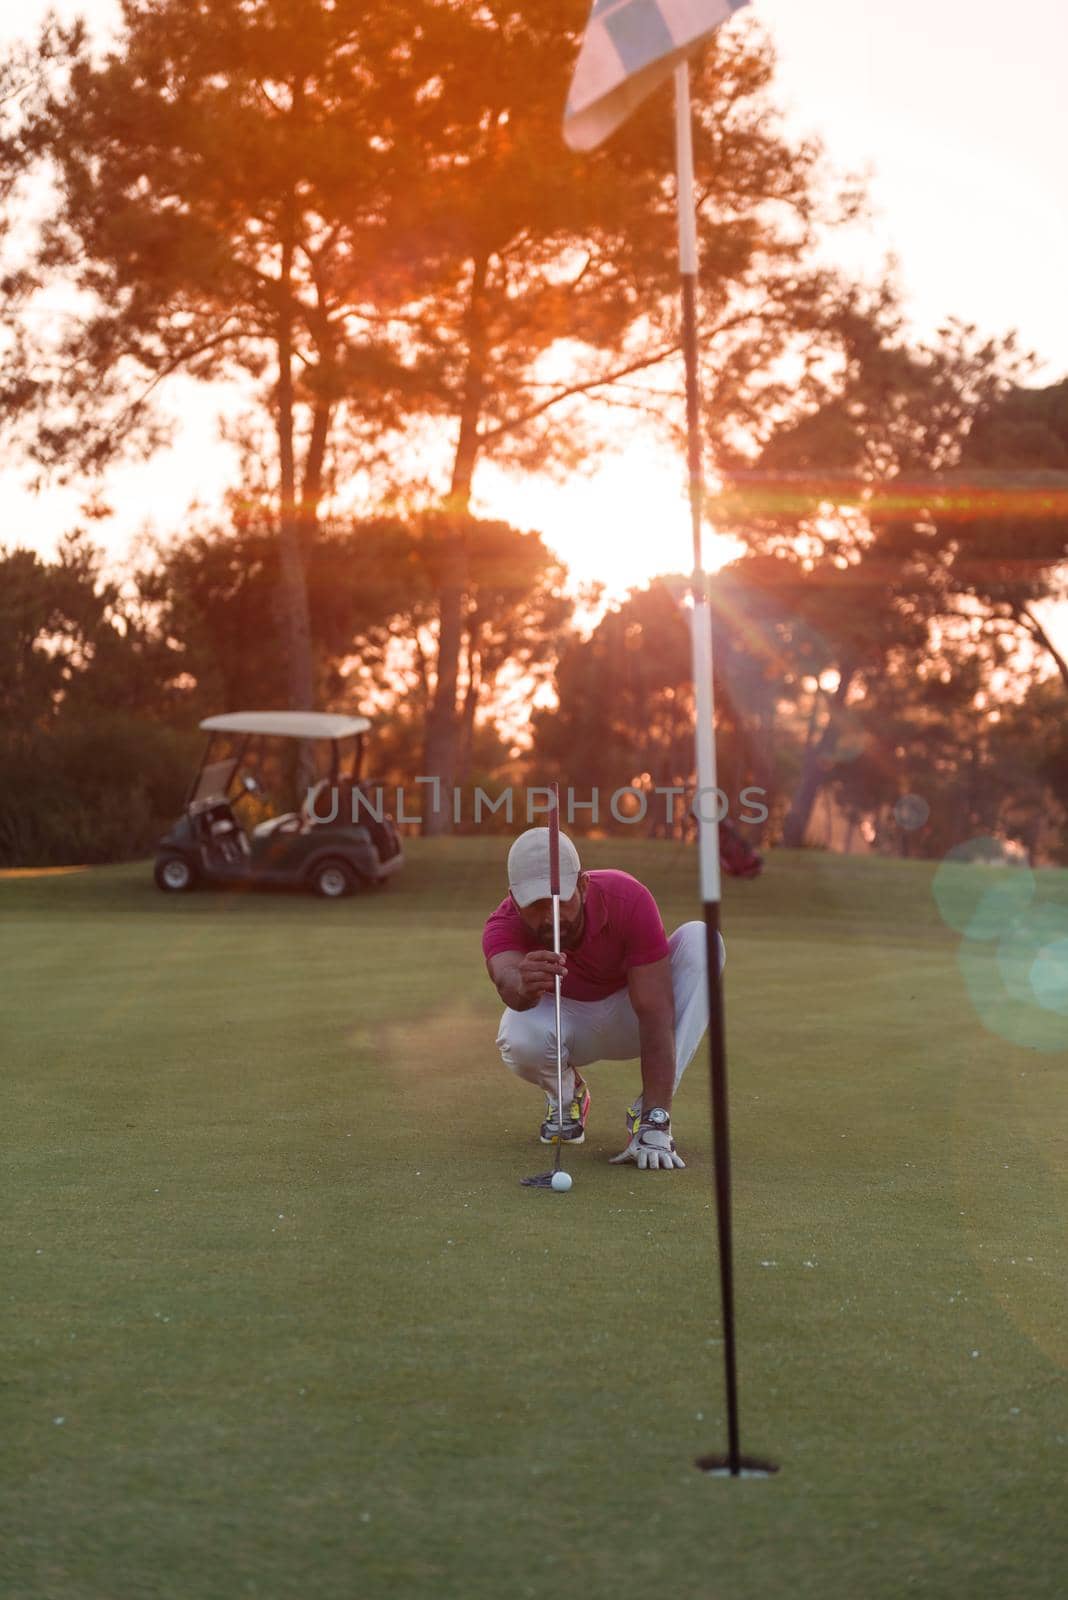 golf player aiming shot with club on course at beautiful sunset with sun flare in background